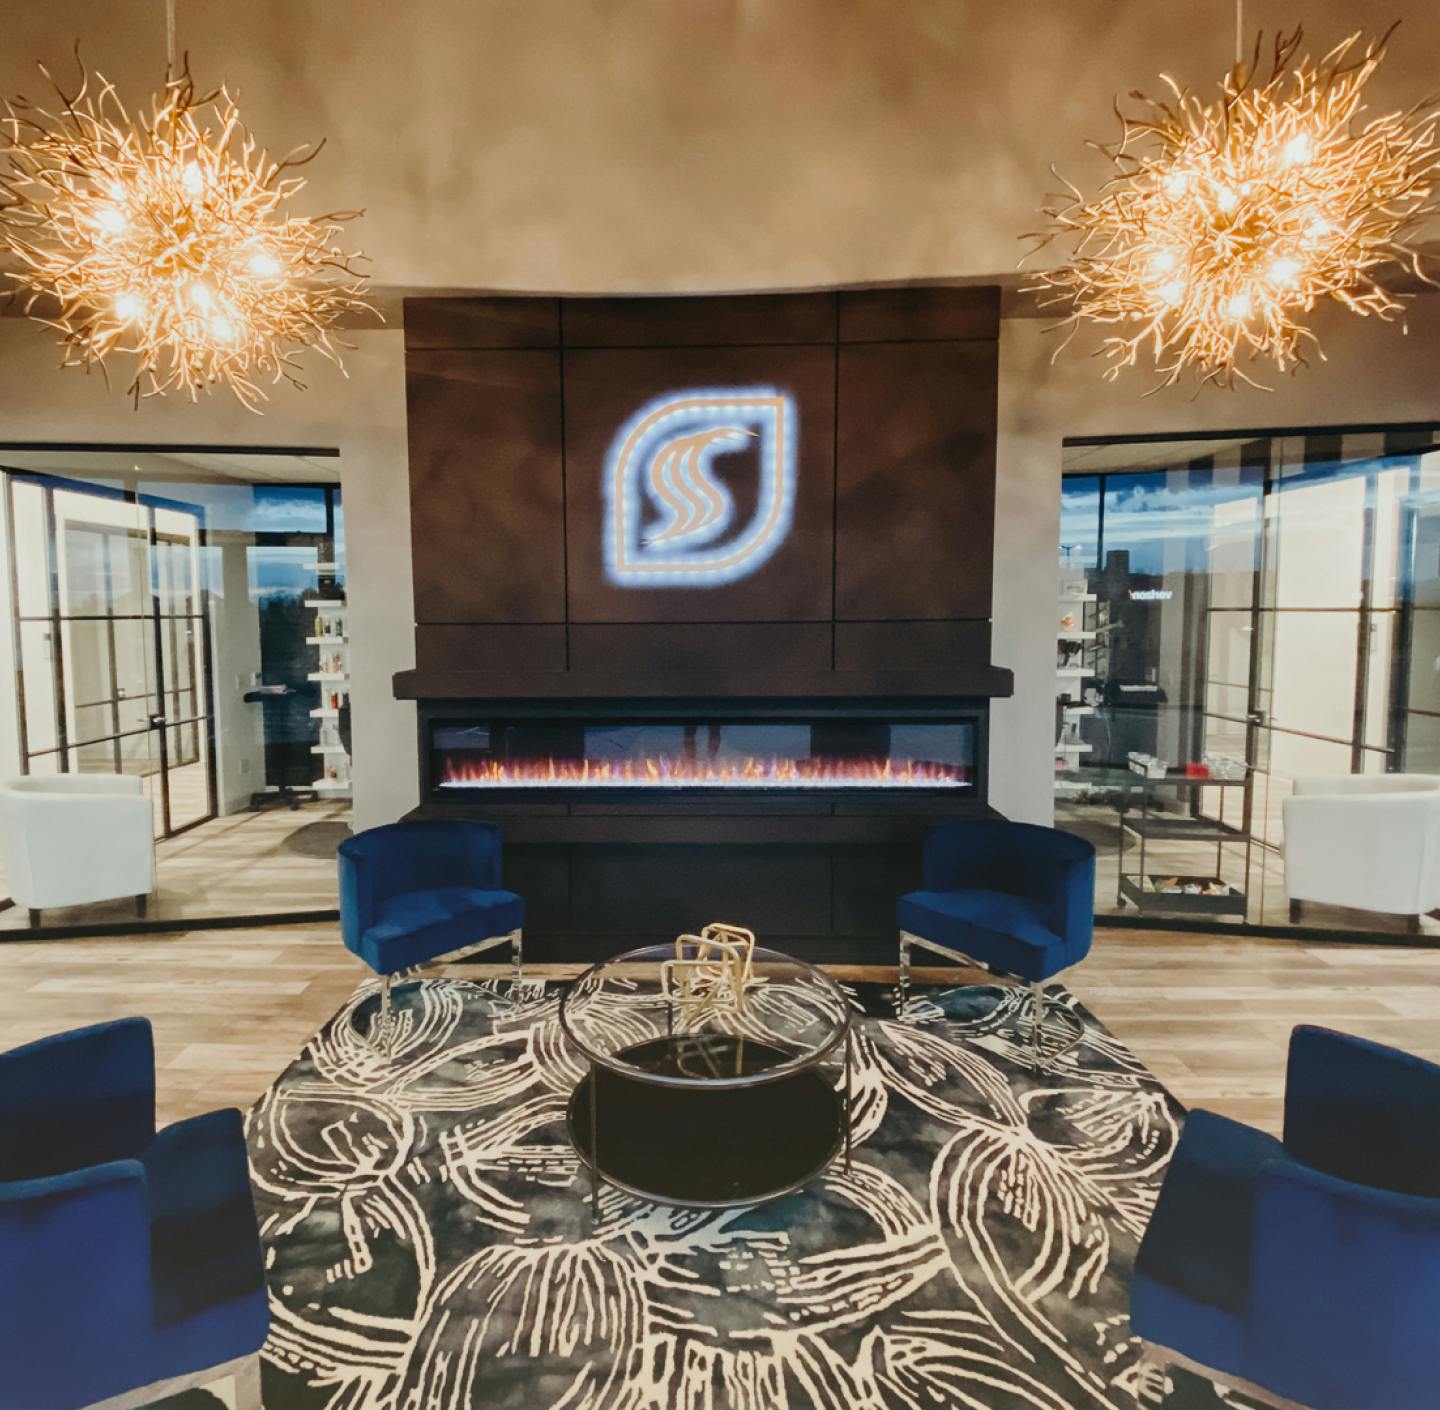 The Spectra Salon suites lobby, with a fireplace and the logo above